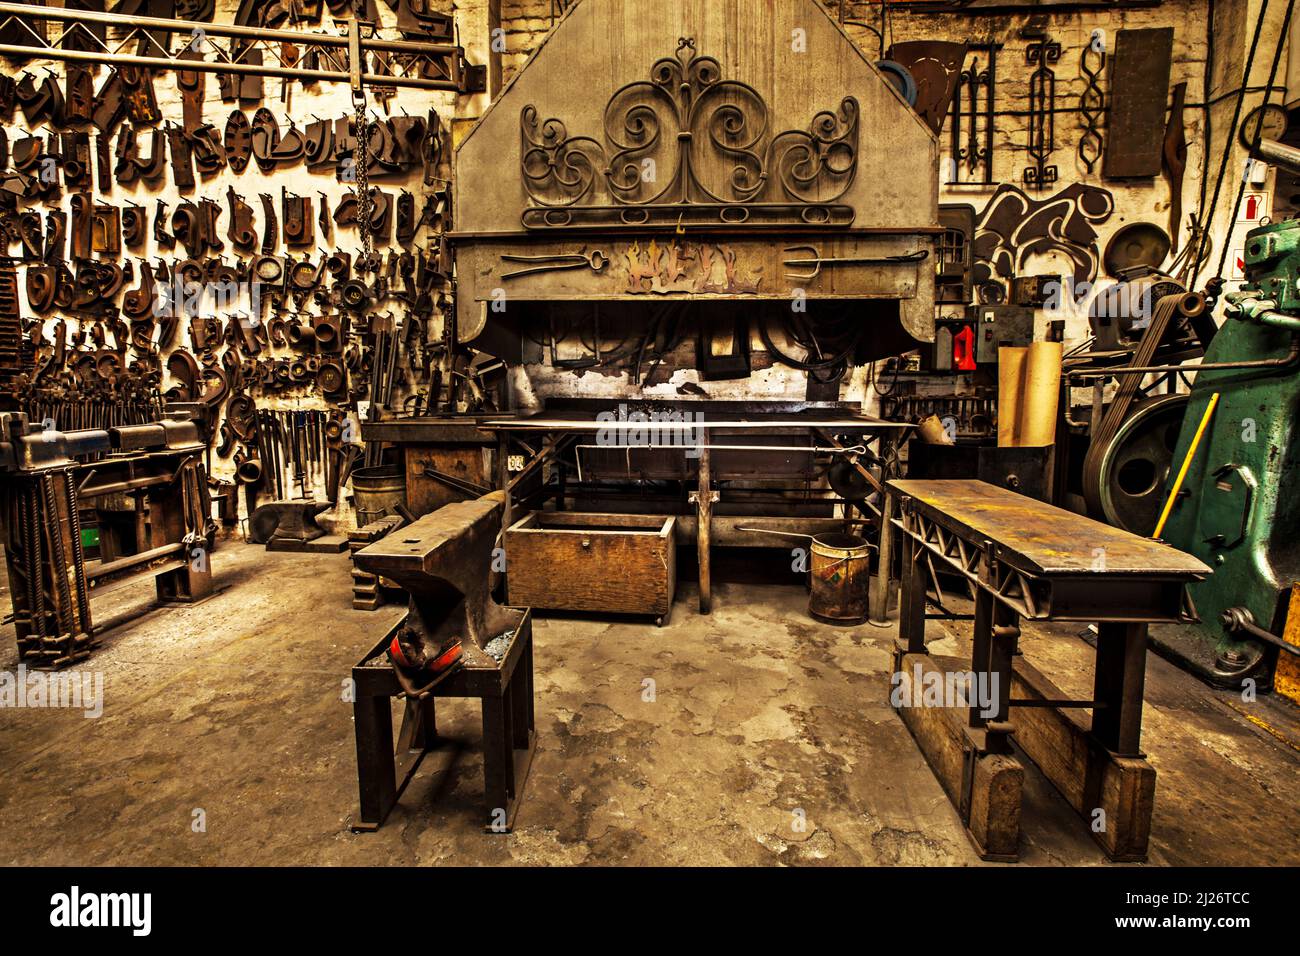 Traditional workshop for a traditional craft. Shot of a metal craftsmans workshop filled with metal tools. Stock Photo